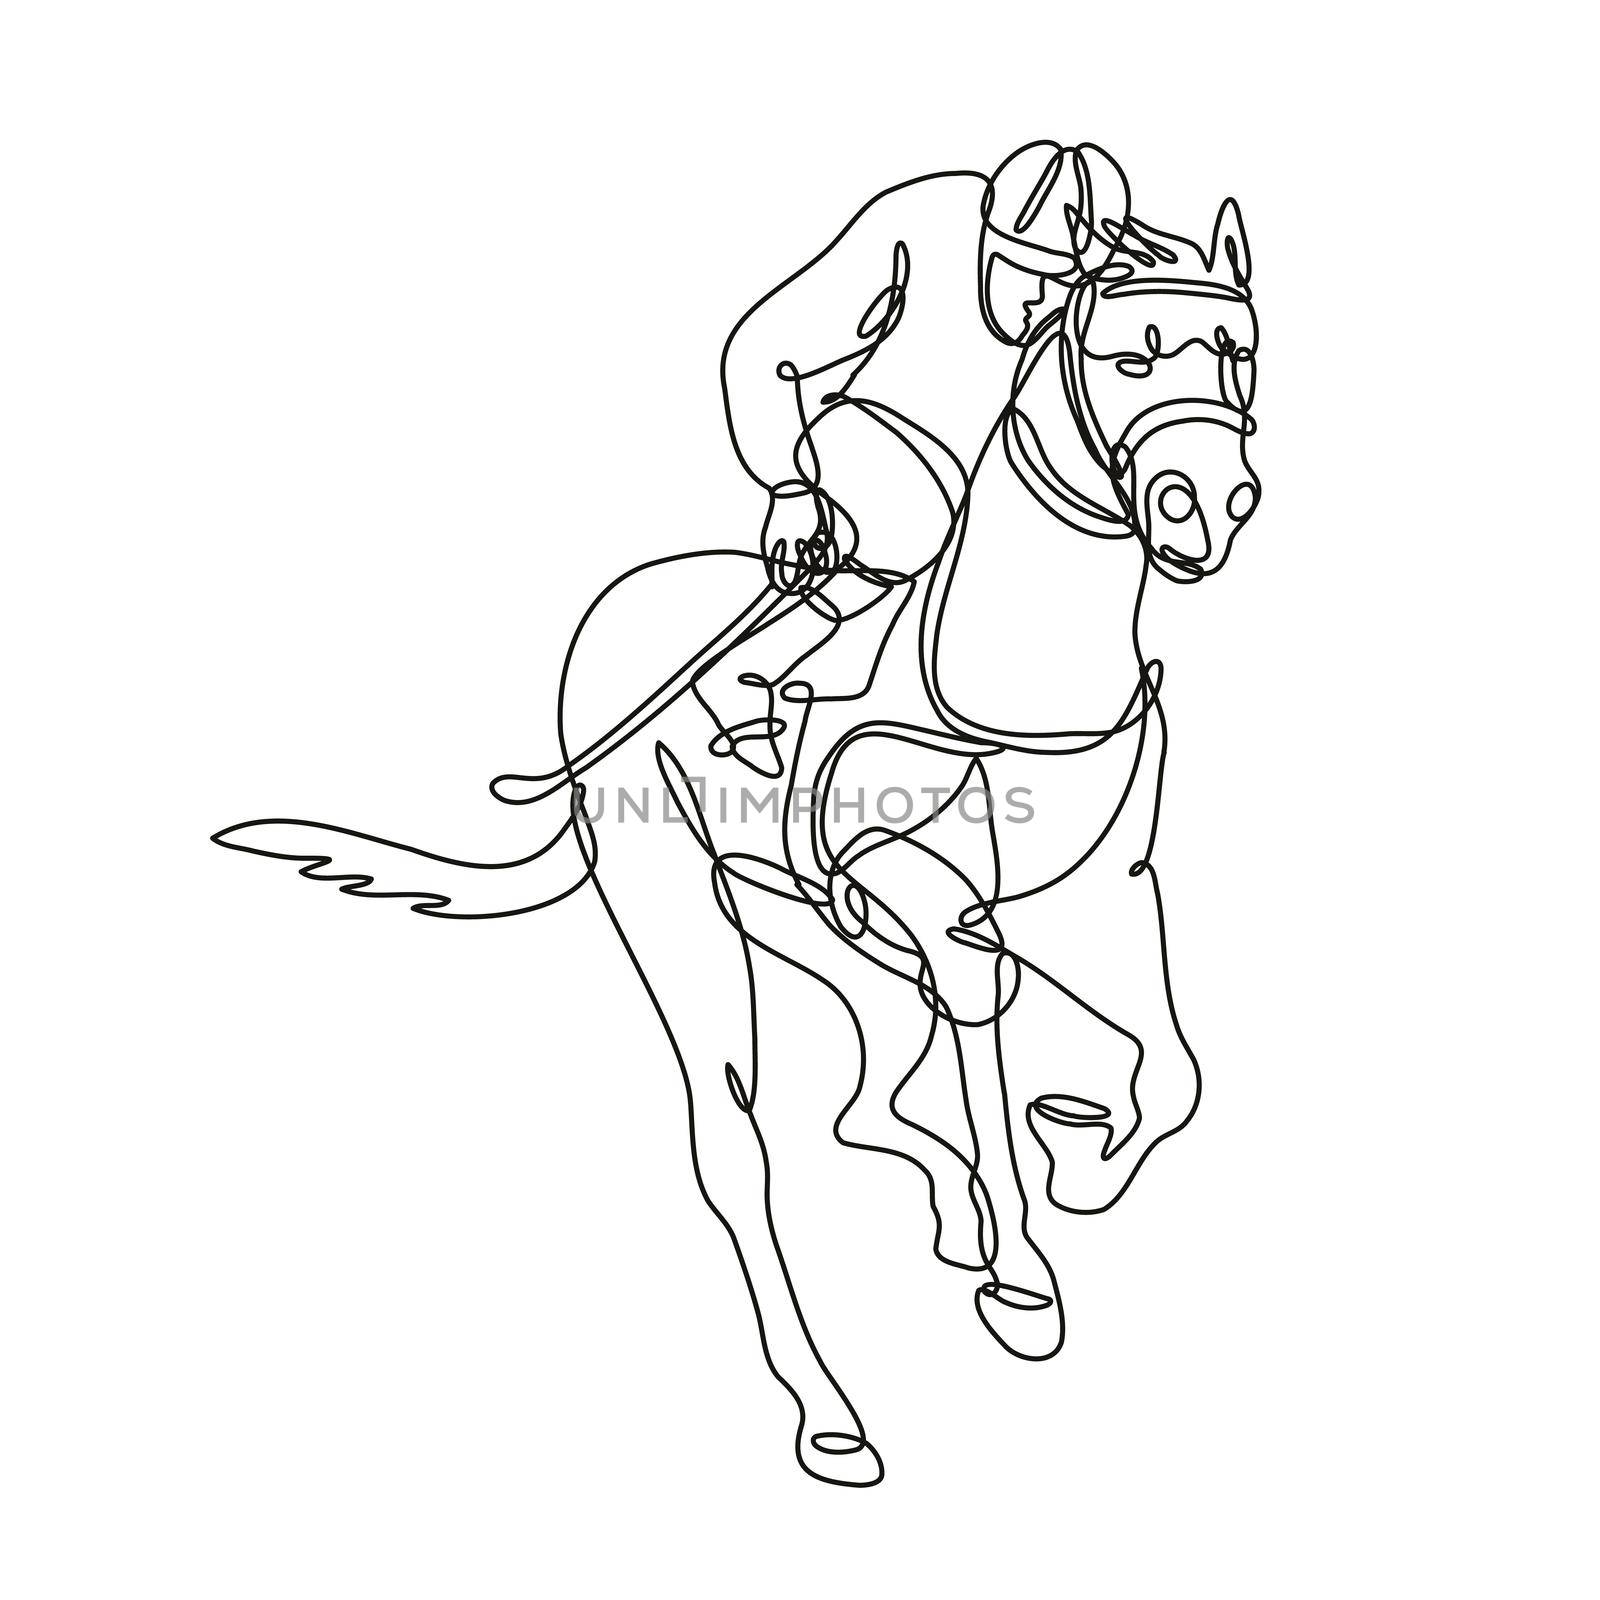 Continuous line drawing illustration of a jockey and horse racing front view inside circle done in mono line or doodle style in black and white on isolated background. 